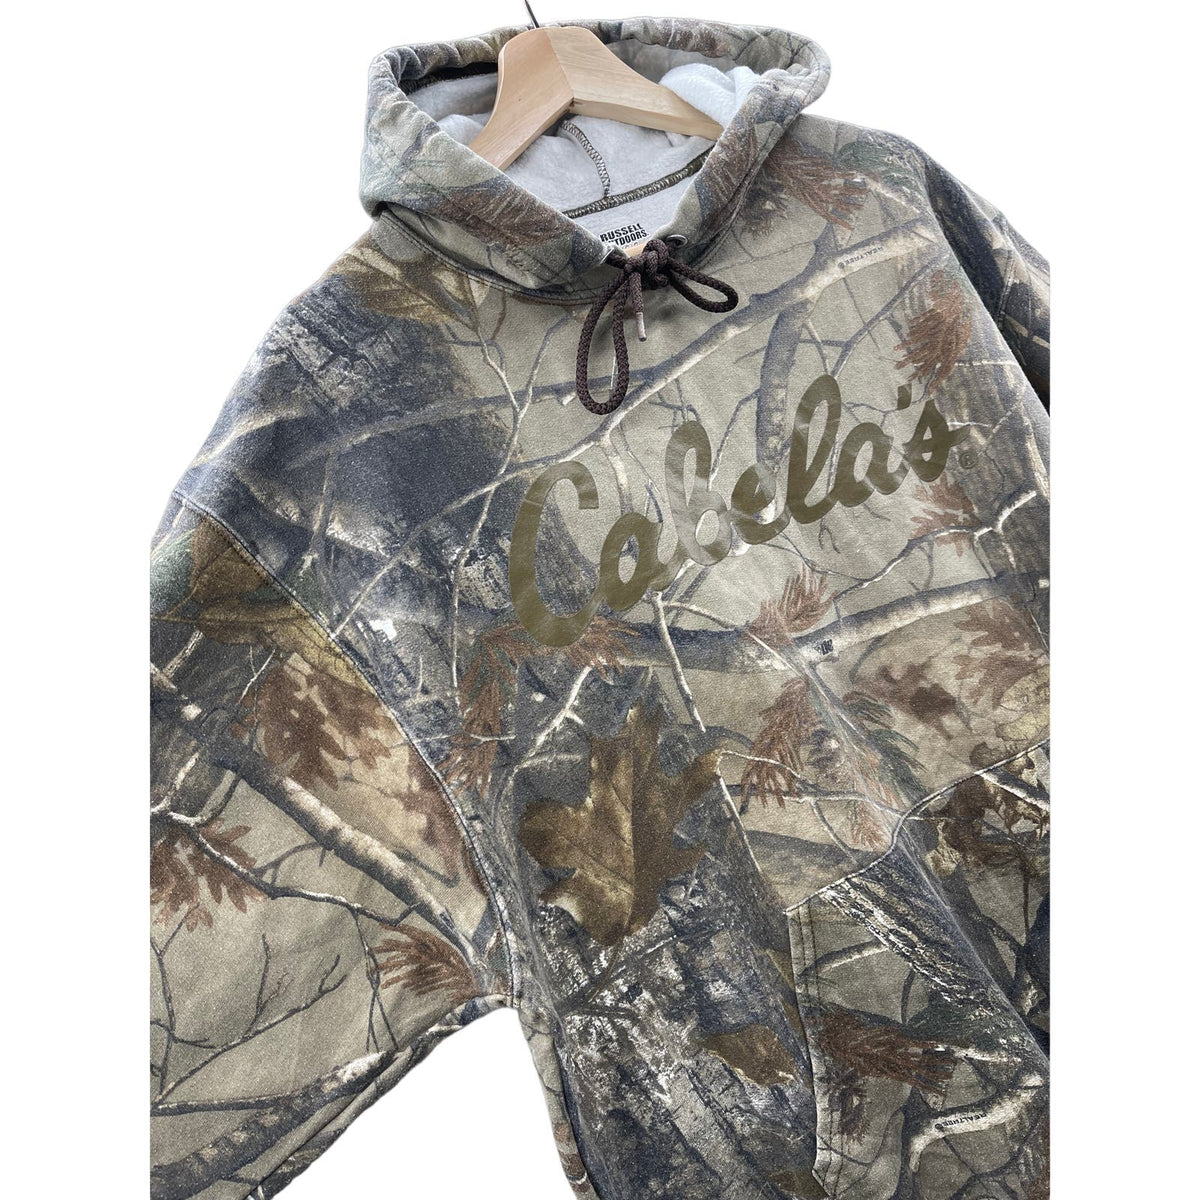 Vintage Cabela's Russell Outdoors Realtree Camo Hoodie